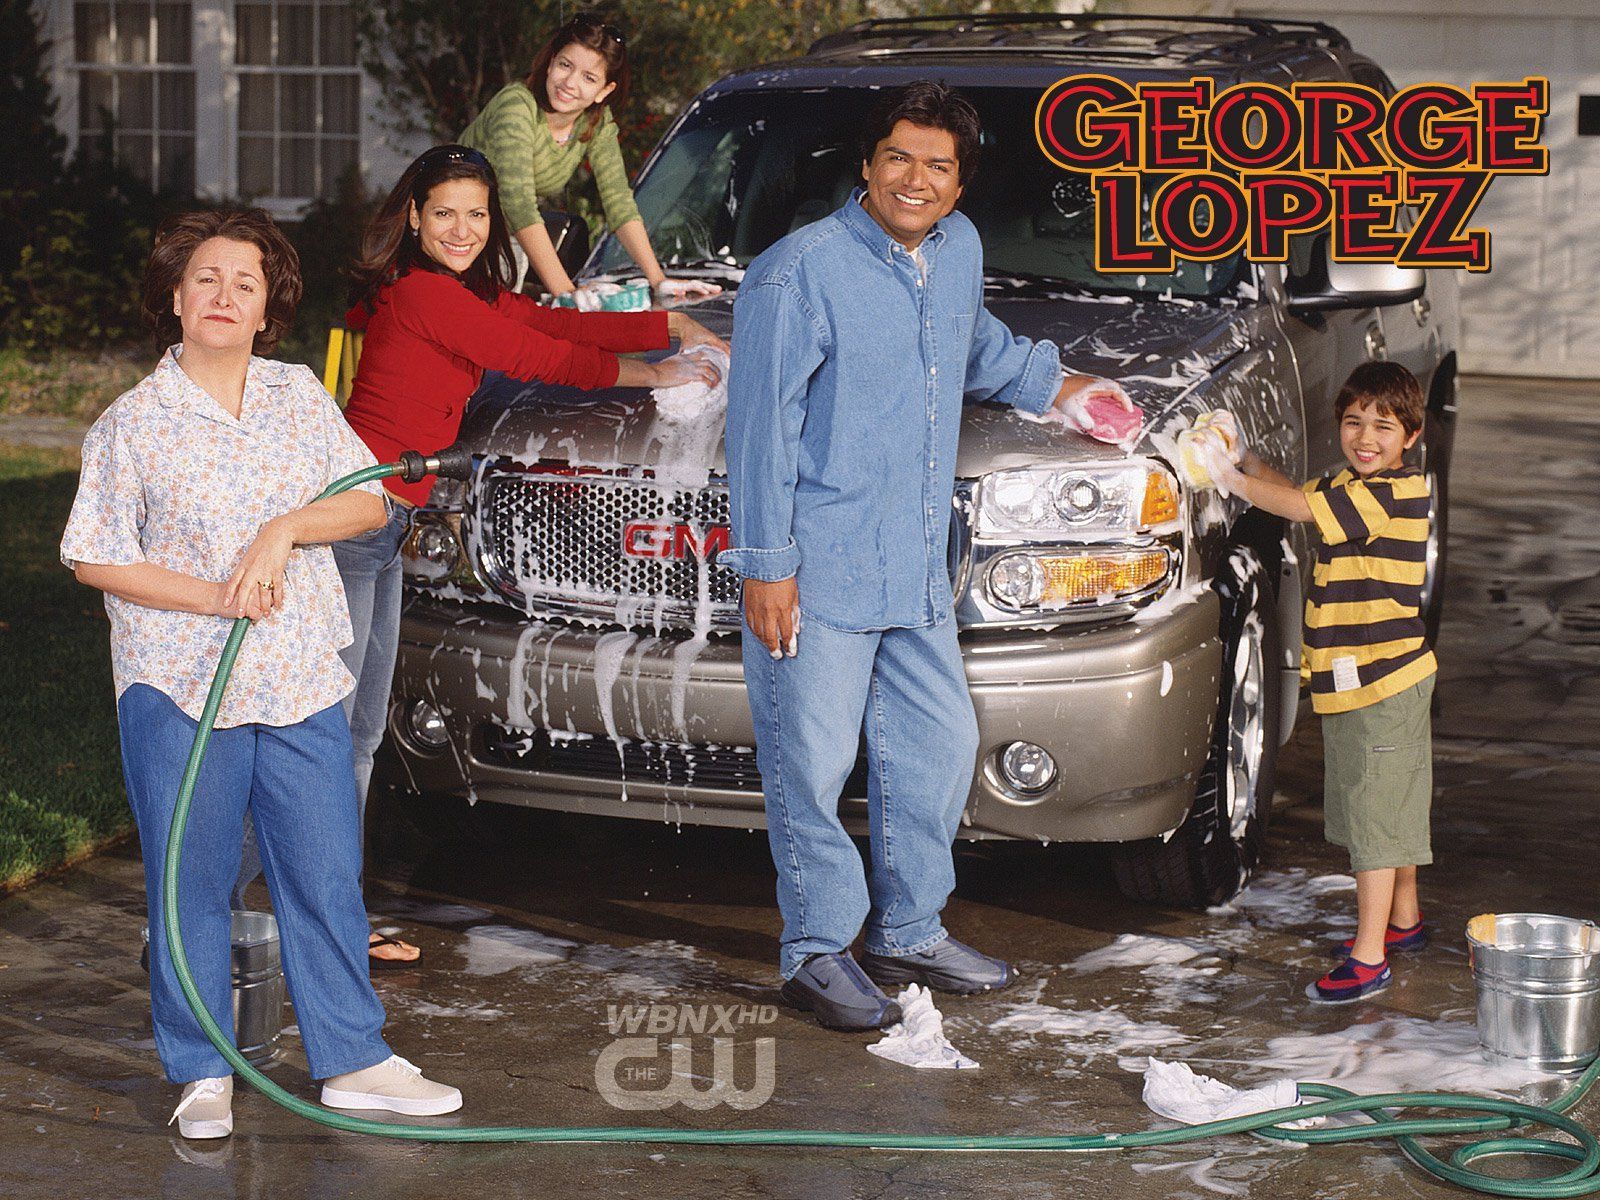 george lopez funny quotes